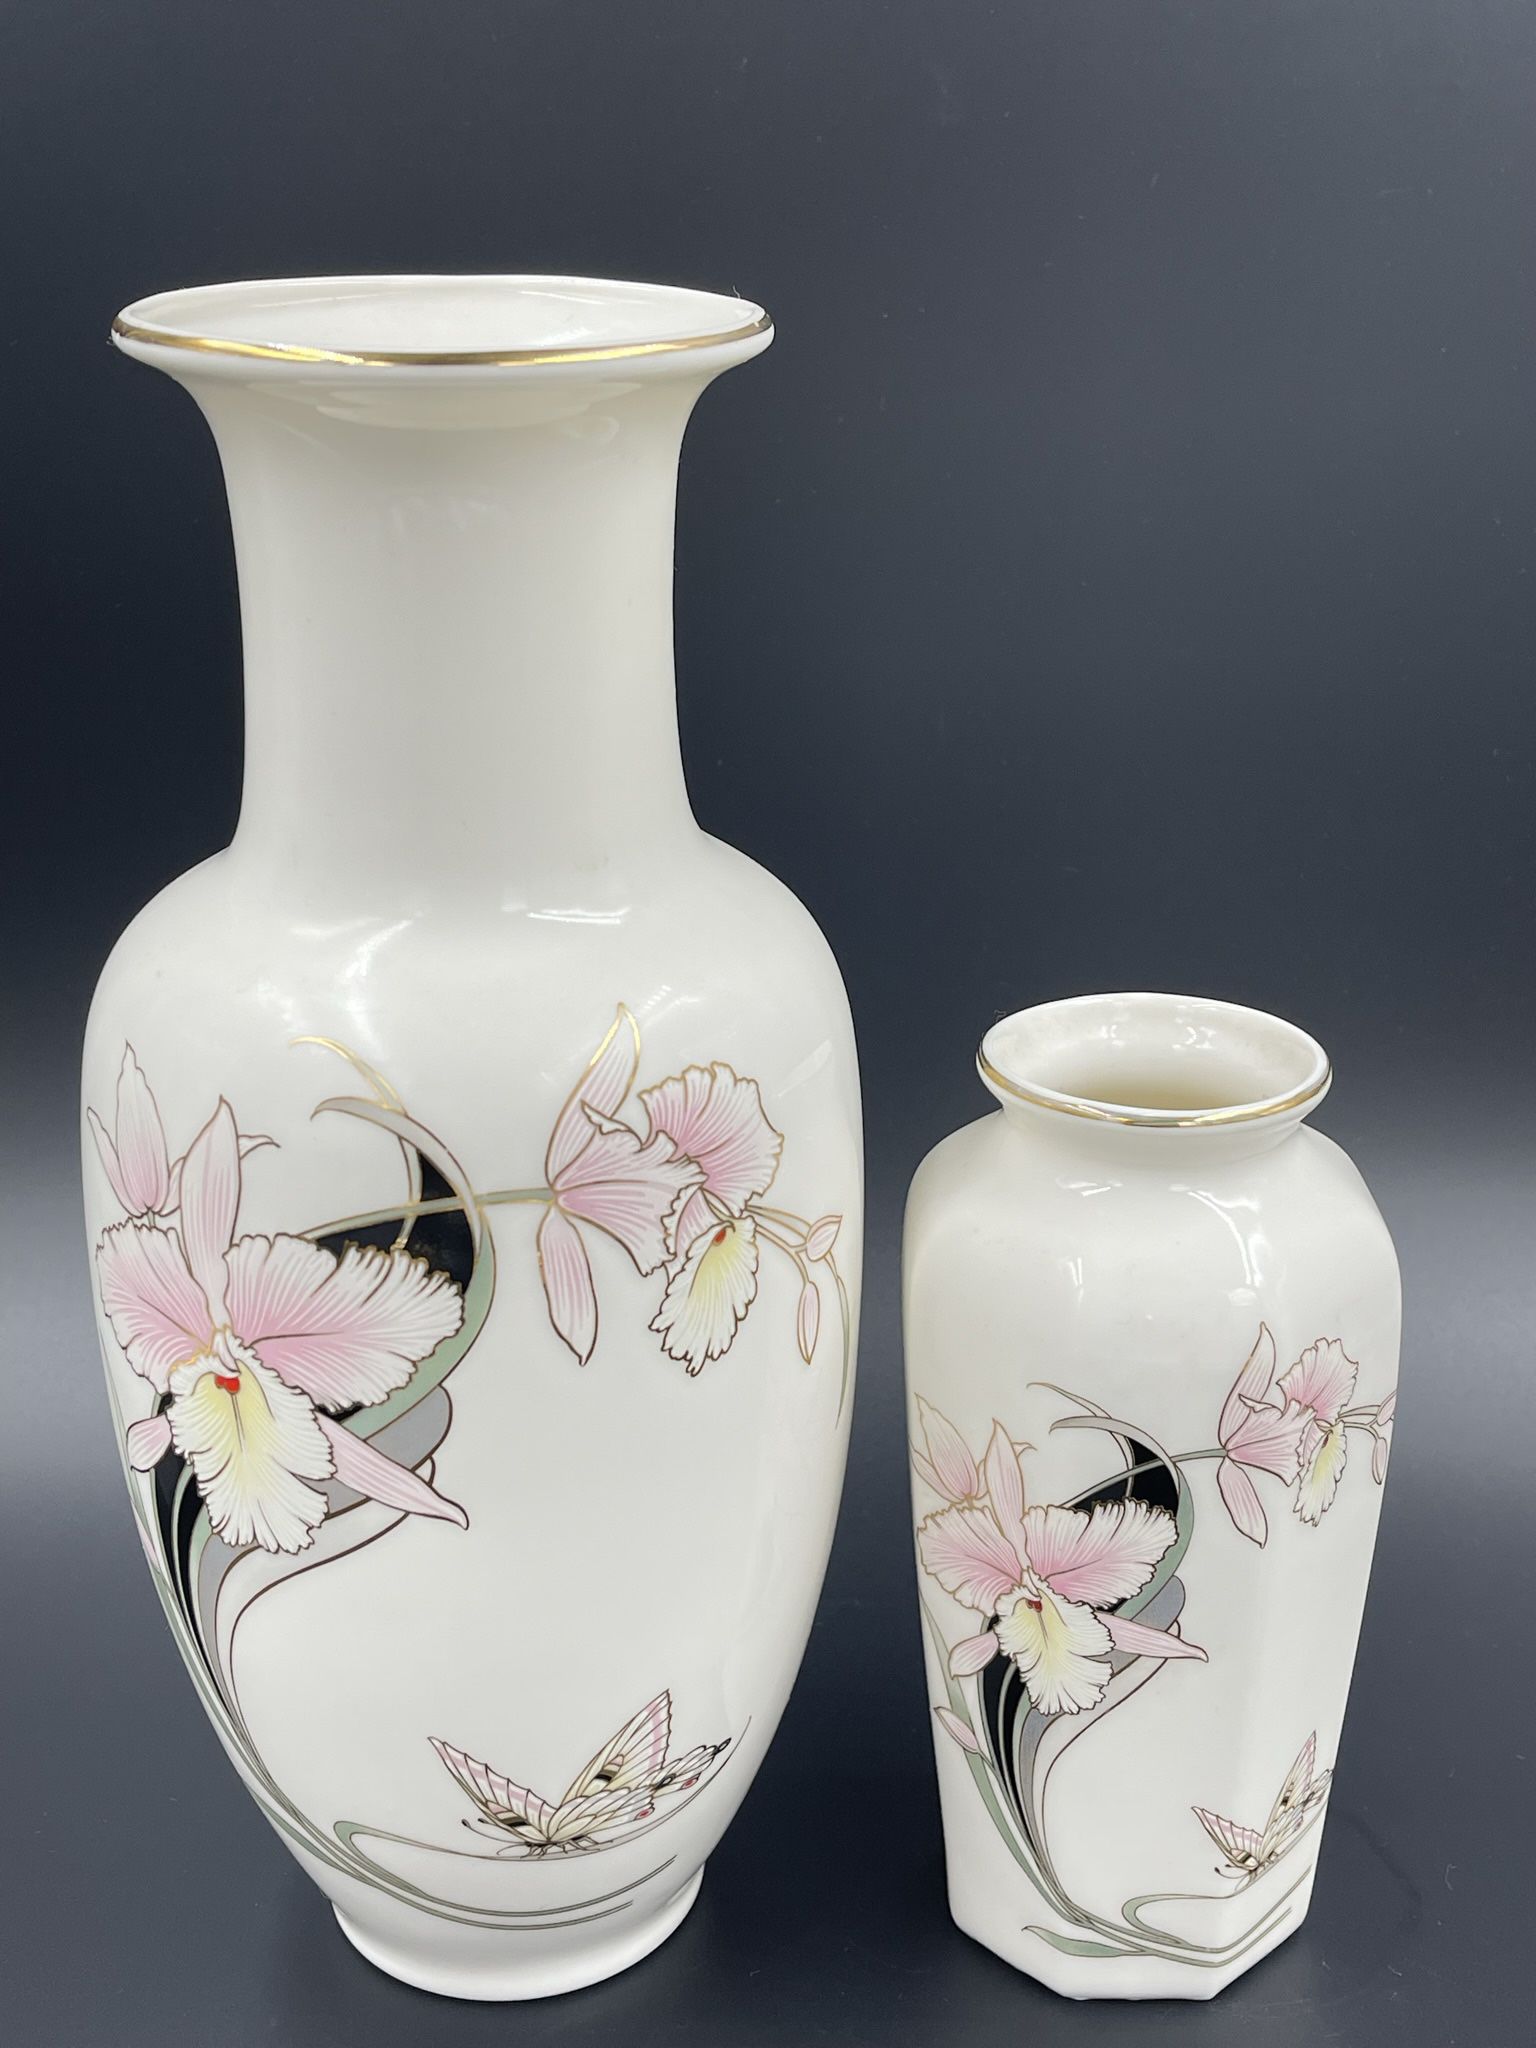 Pair Of Vases Iris flowers and Butterfly made in Japan Vintage Fine China Porcelain White Gilded 